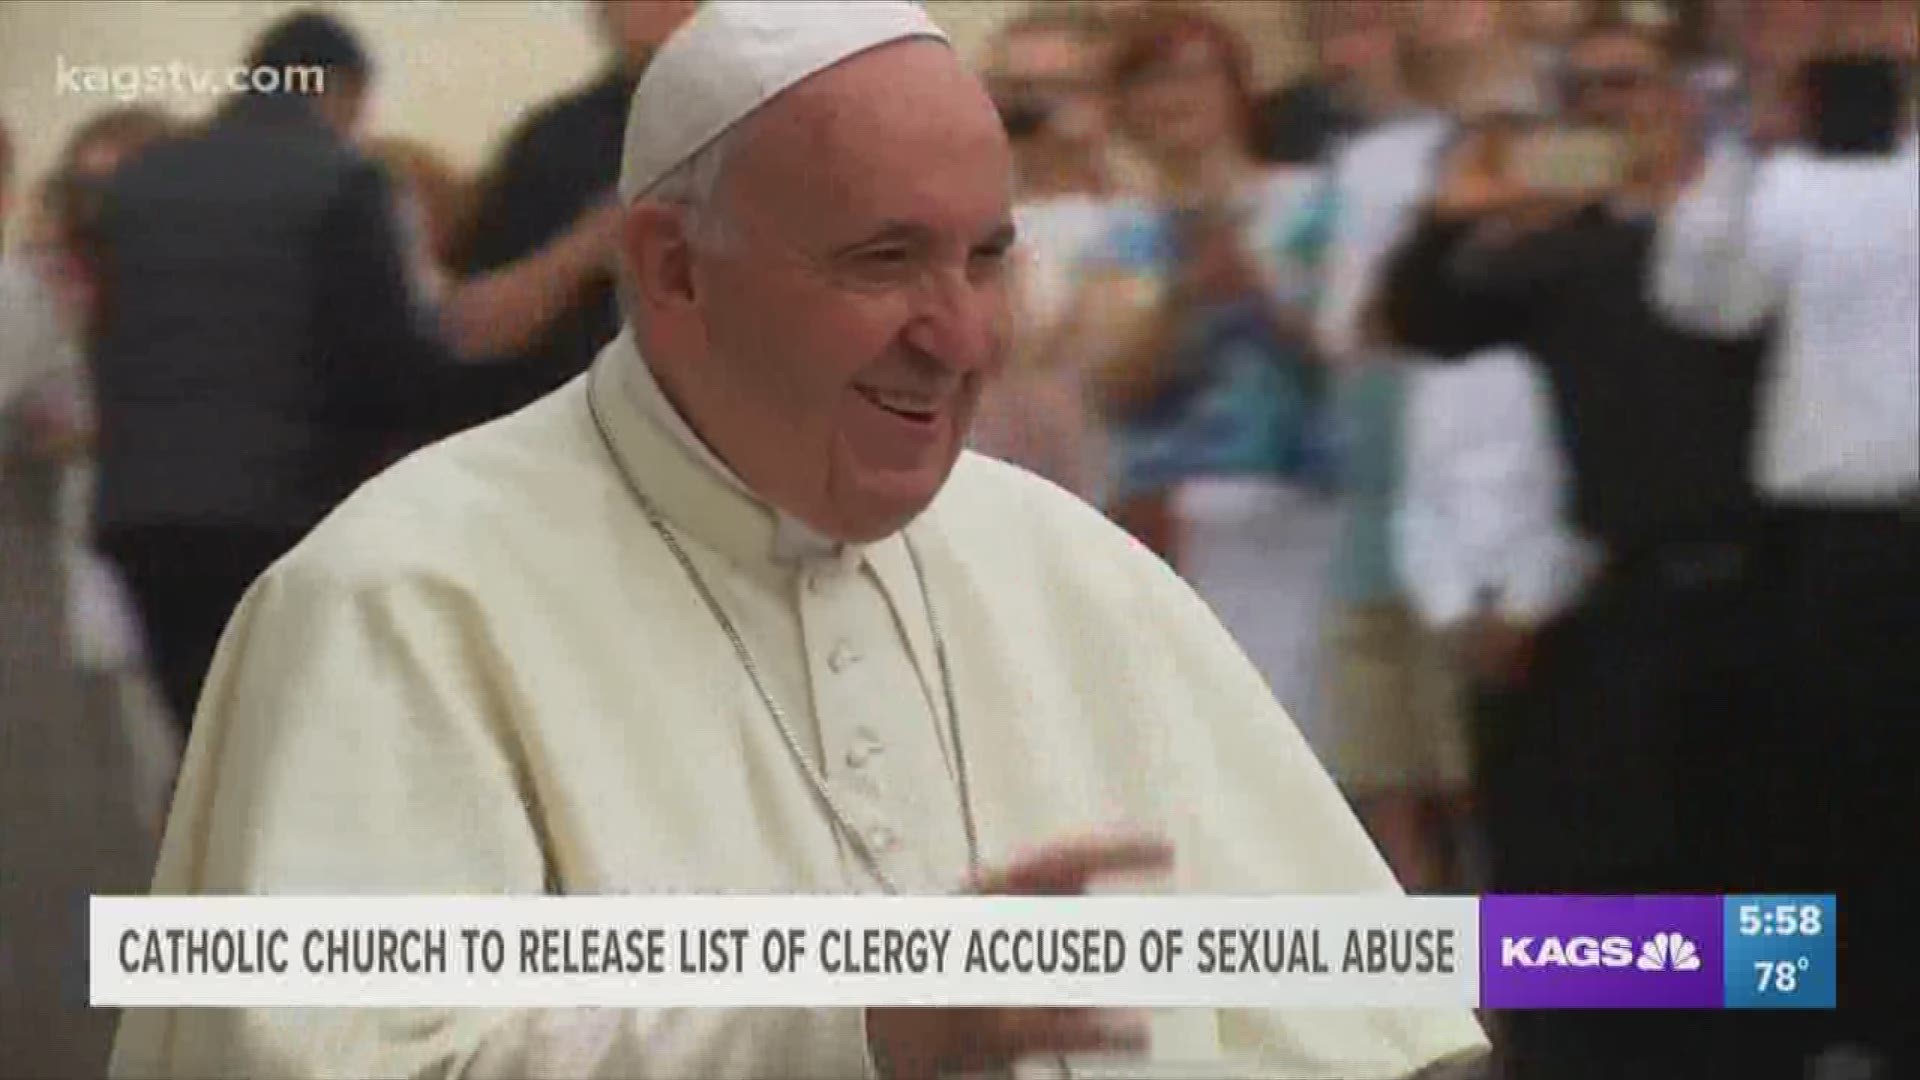 A major announcement from the catholic Church in Texas today, they plan to release the names of clergy members accused of sexual assault.